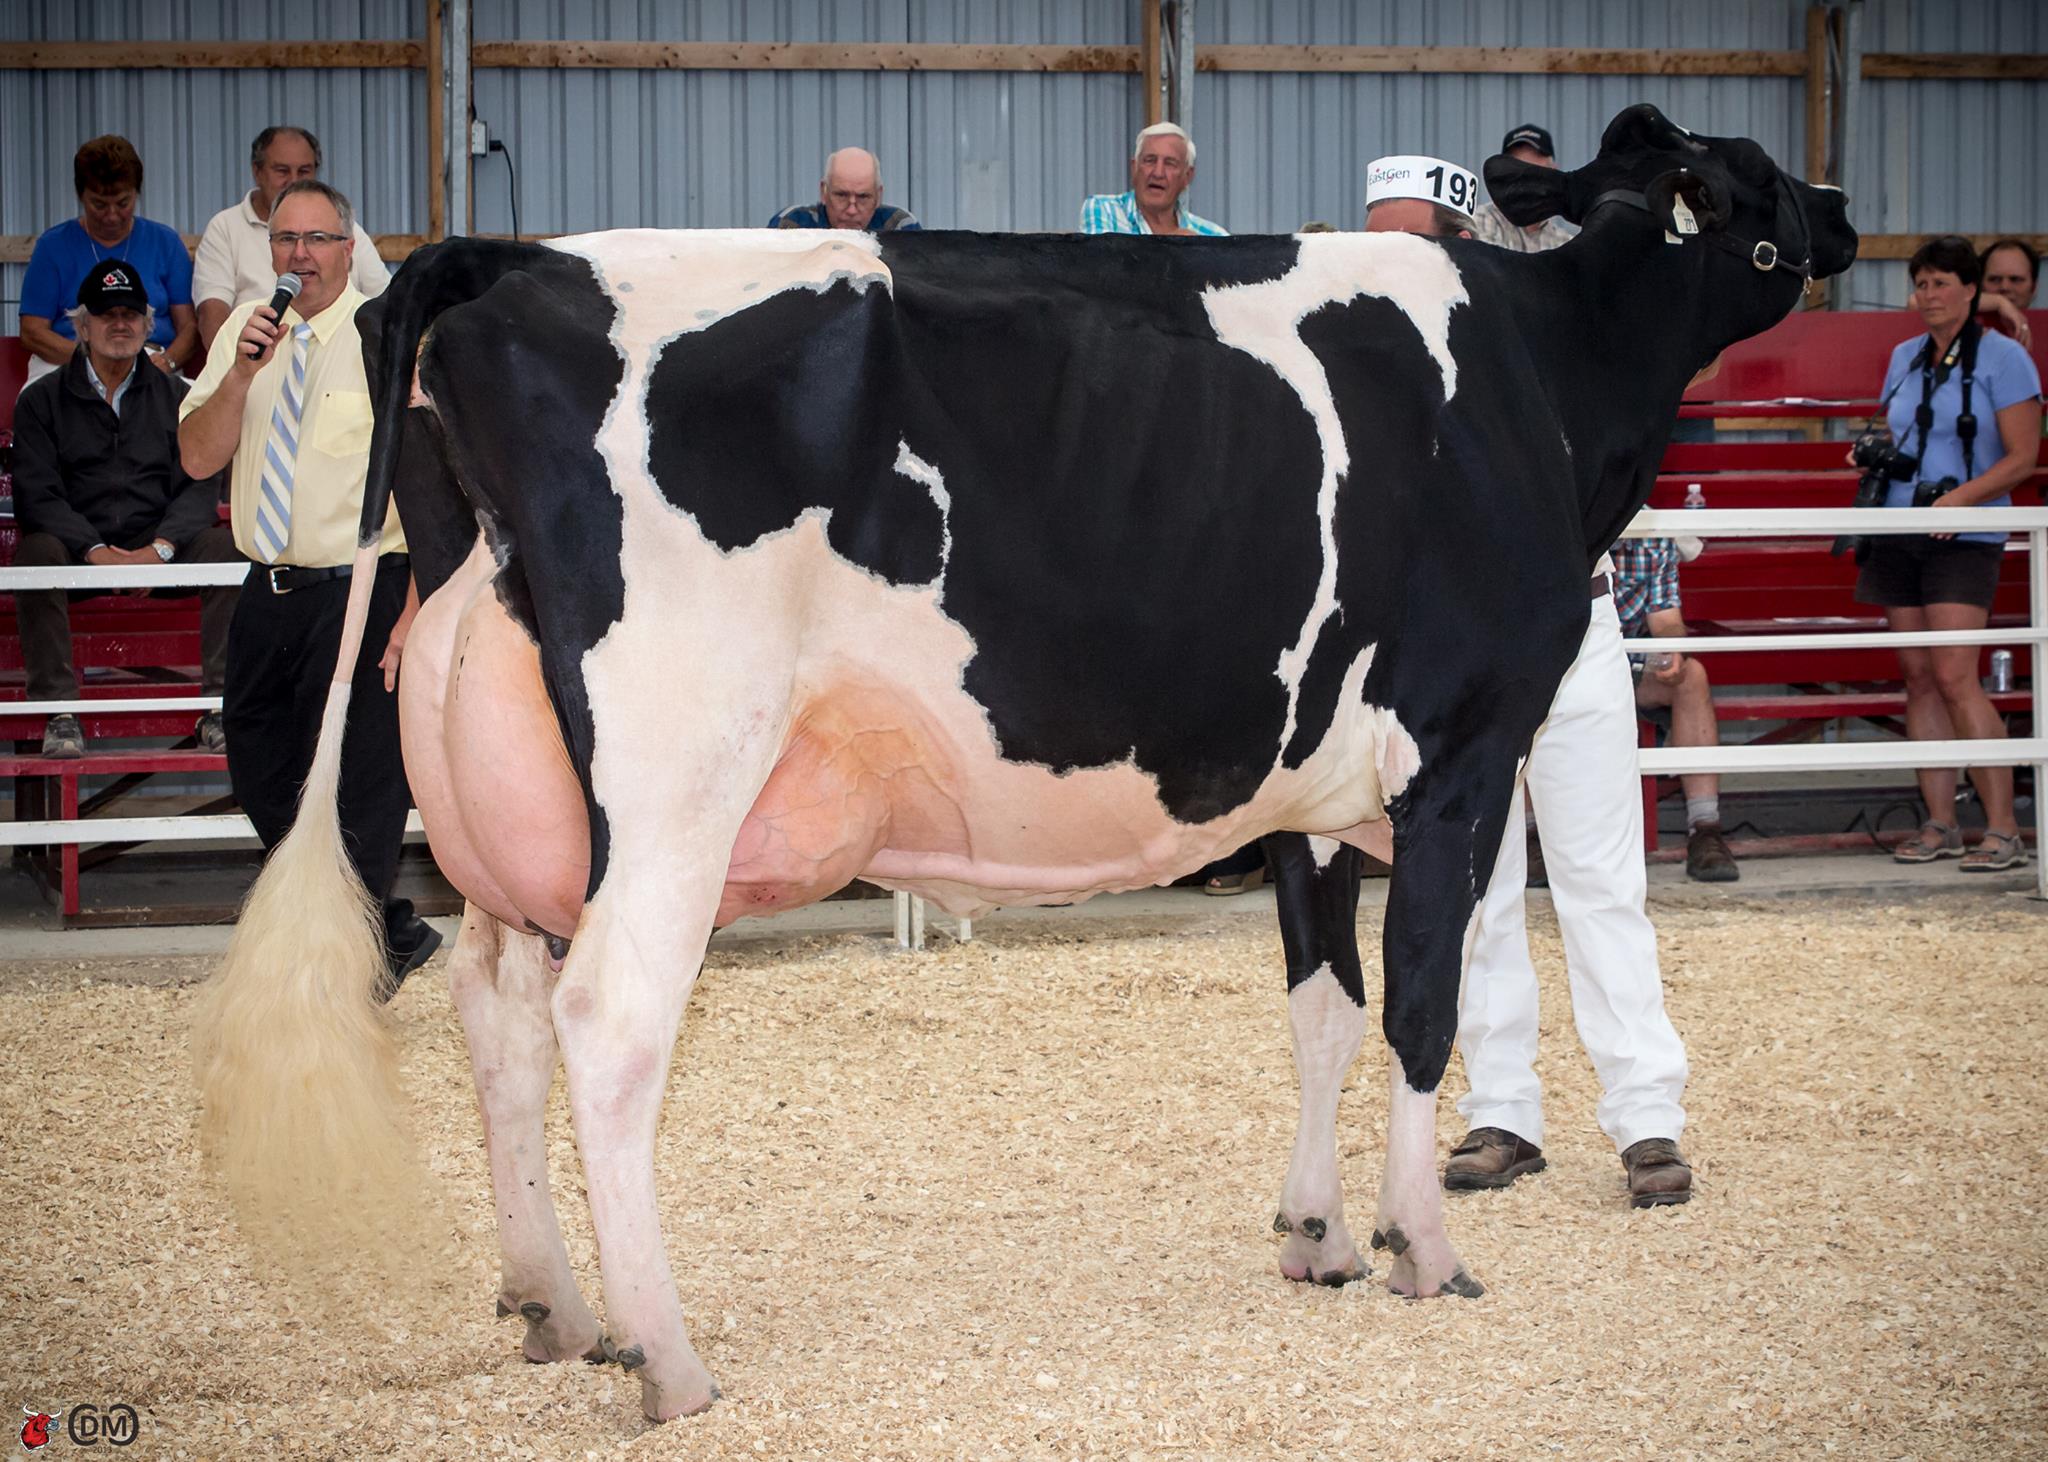 Grand Champion Ontario Summer Show - Calbrett Goldwyn Layla (Goldwyn), Mature Cow, For then owners: Cormdale, Genervations, Kruger, Al-Be-Ro land and cattle.  Now owned by Comestar Holsteins and Ponderosa farms of Spain.